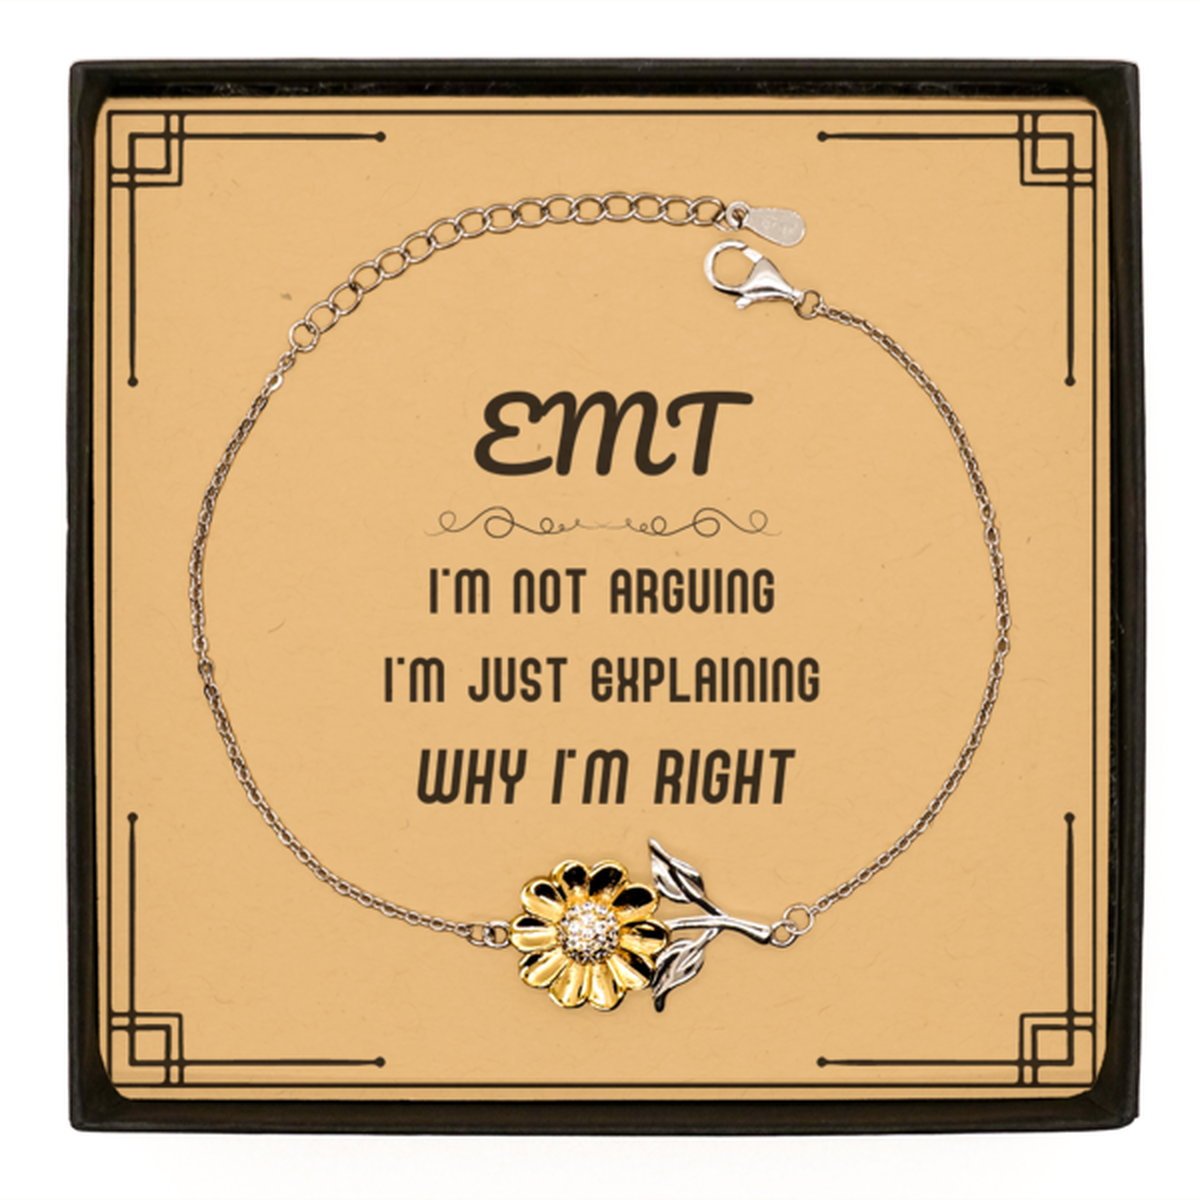 EMT I'm not Arguing. I'm Just Explaining Why I'm RIGHT Sunflower Bracelet, Funny Saying Quote EMT Gifts For EMT Message Card Graduation Birthday Christmas Gifts for Men Women Coworker